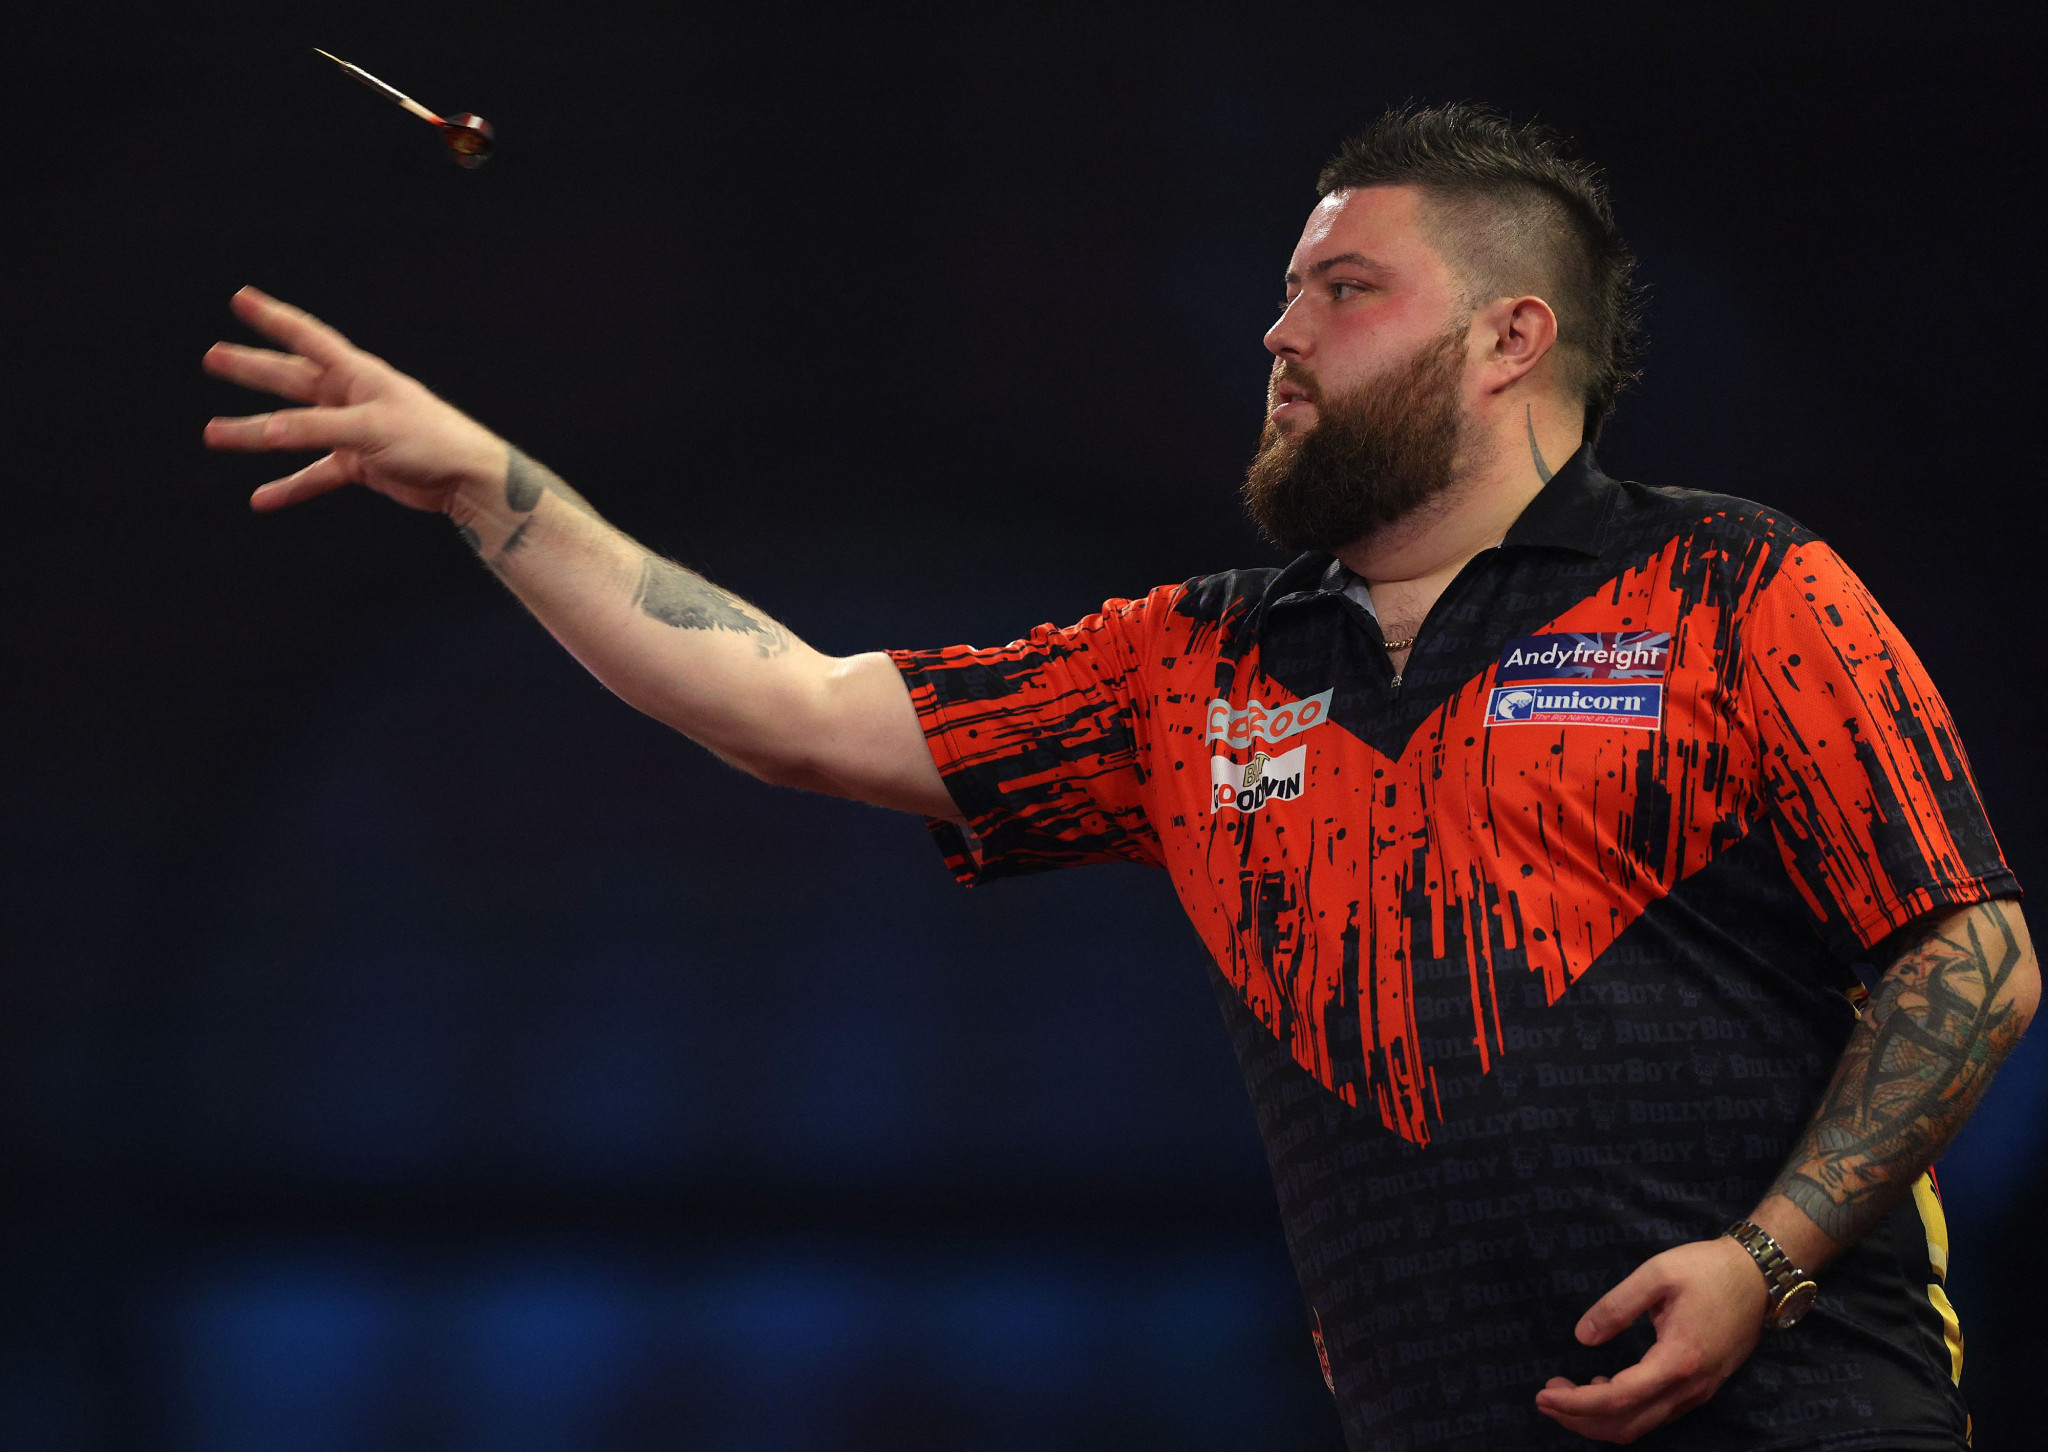 Michael Smith hit a nine-dart finish in set two on his way to winning his first PDC World Championship title ©Getty Images